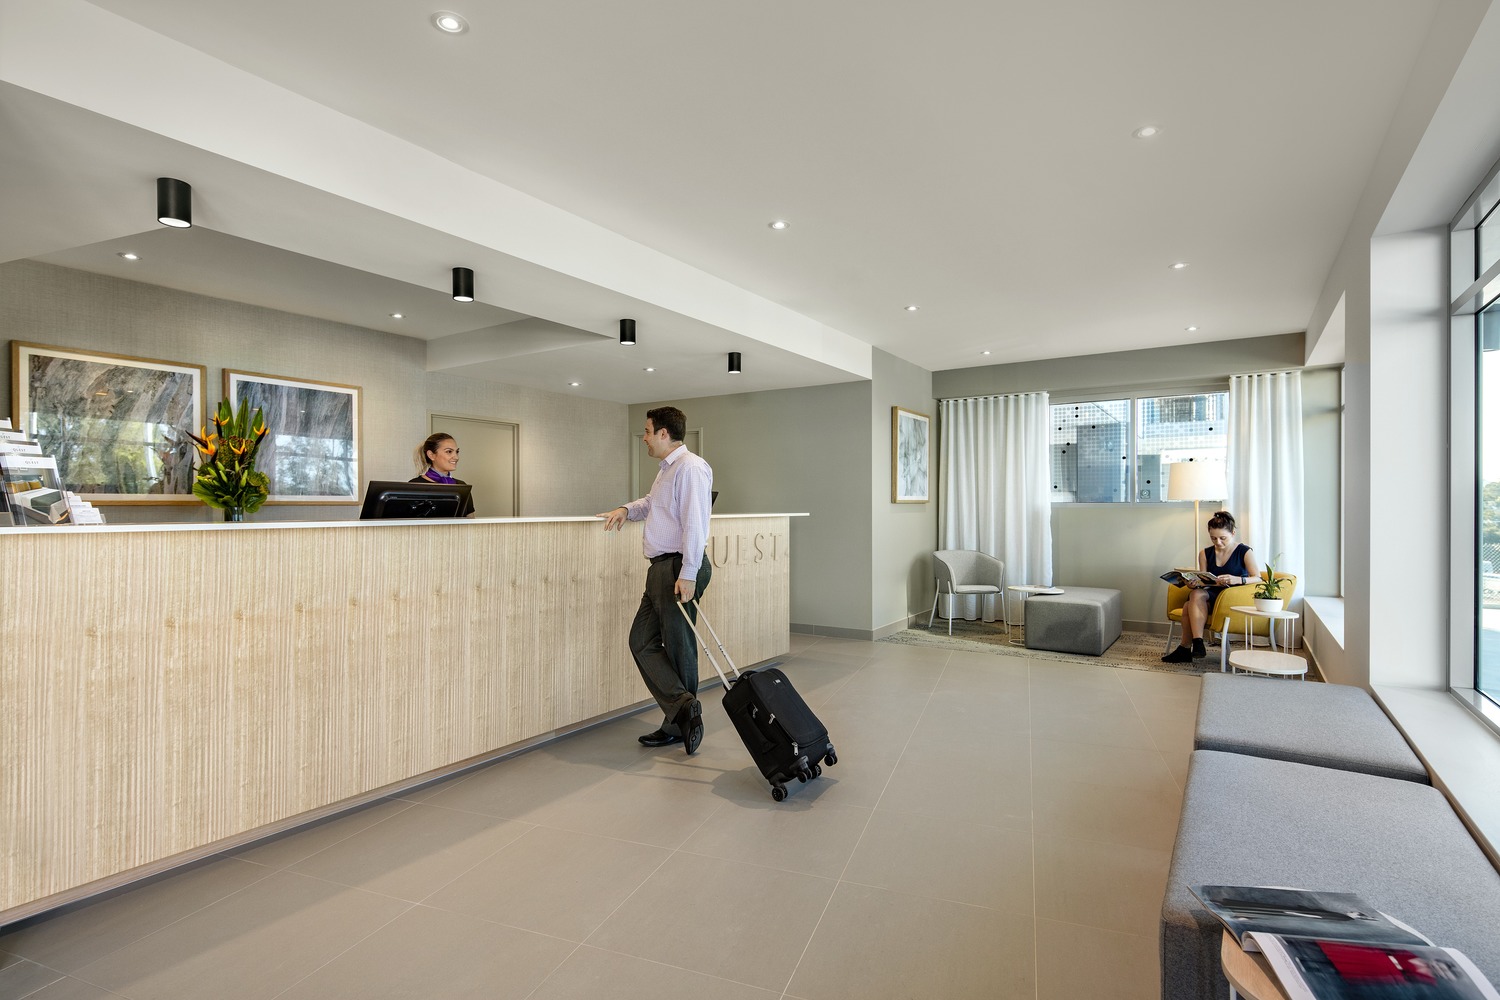 Quest Eight Mile Plains Gallery | Eight Mile Plains Hotel | Quest Eight Mile Plains ...1500 x 1000